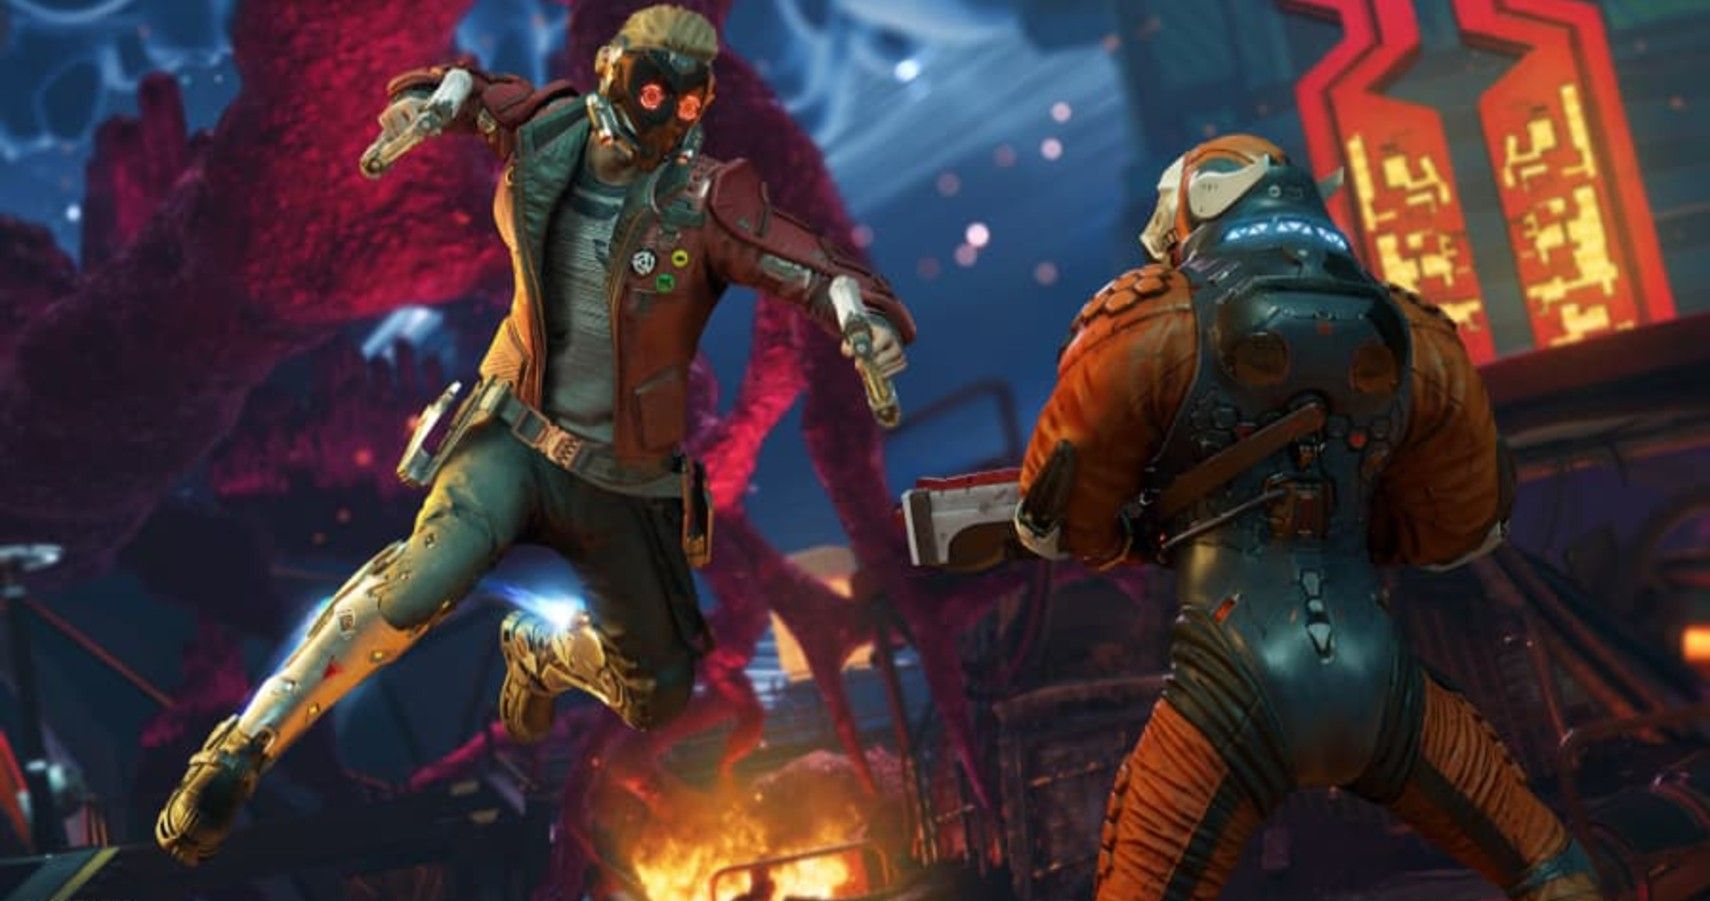 The Guardians Of The Galaxy Game Looks Like The Perfect Halfway House Between The Films And The Comics